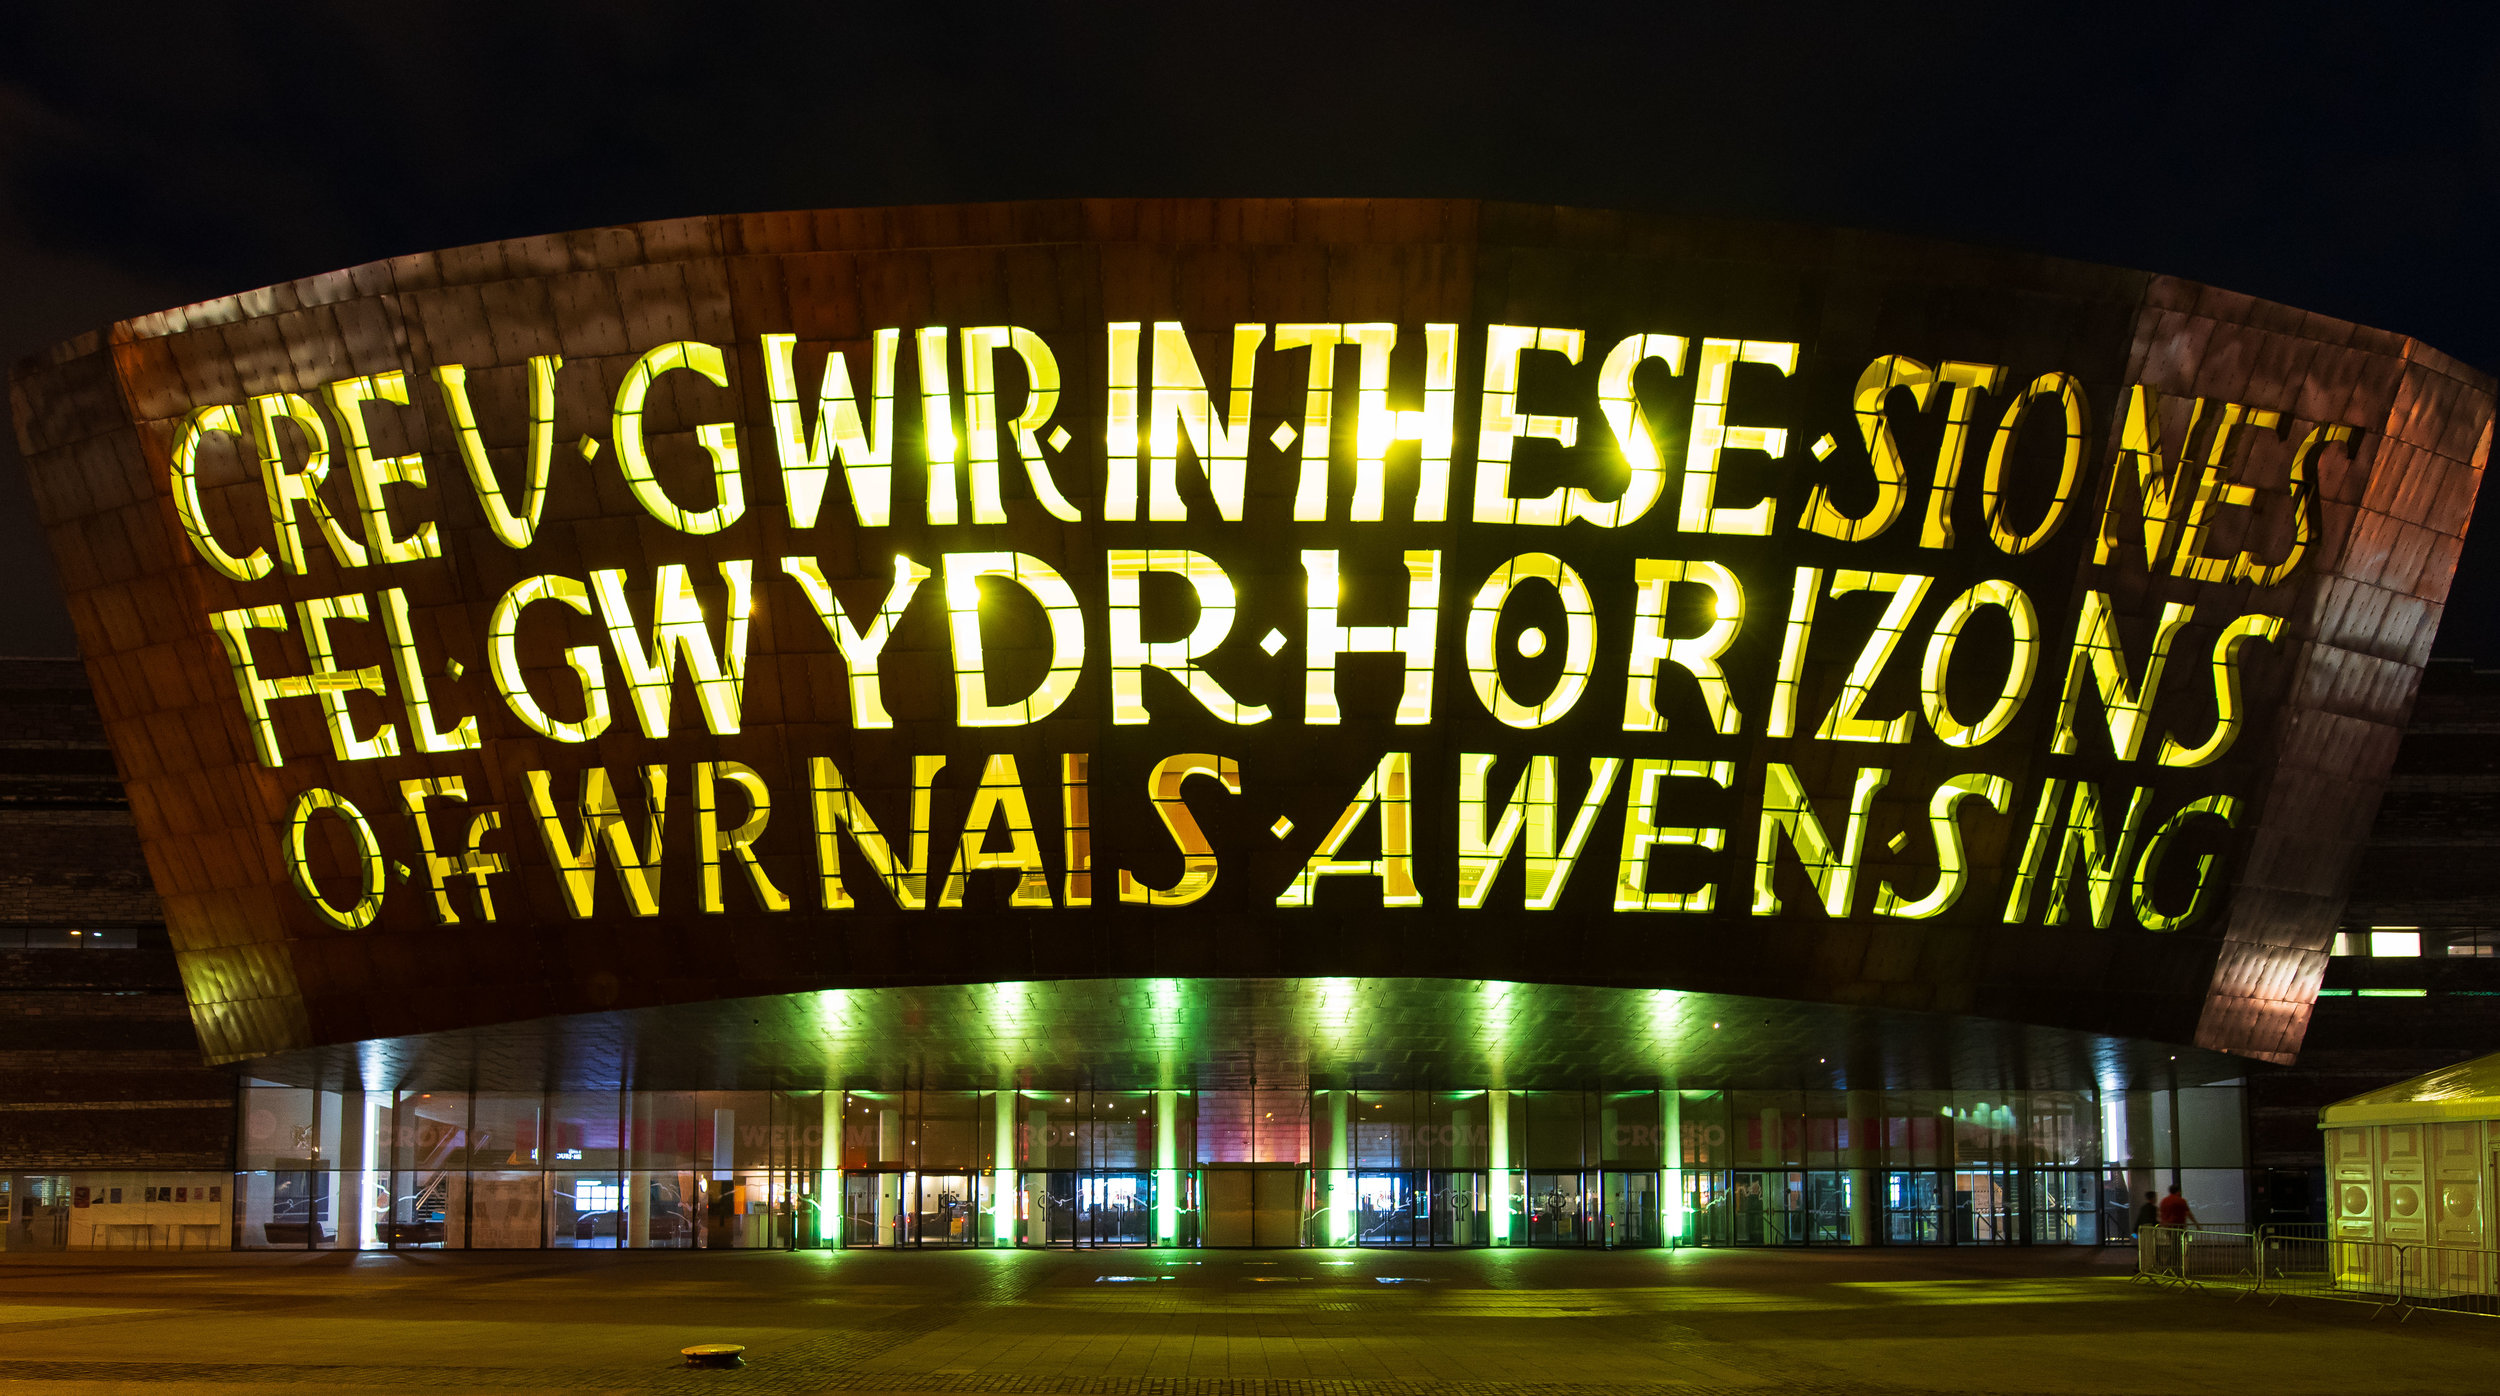  CARDIFF, WALES - JULY 29: The Wales Millennium Centre, Wales' national centre for performing arts, is seen illuminated in yellow light following cyclist Geraint Thomas' victory in the Tour De France on July 29, 2018 in Cardiff, Wales. Team Sky's Ger